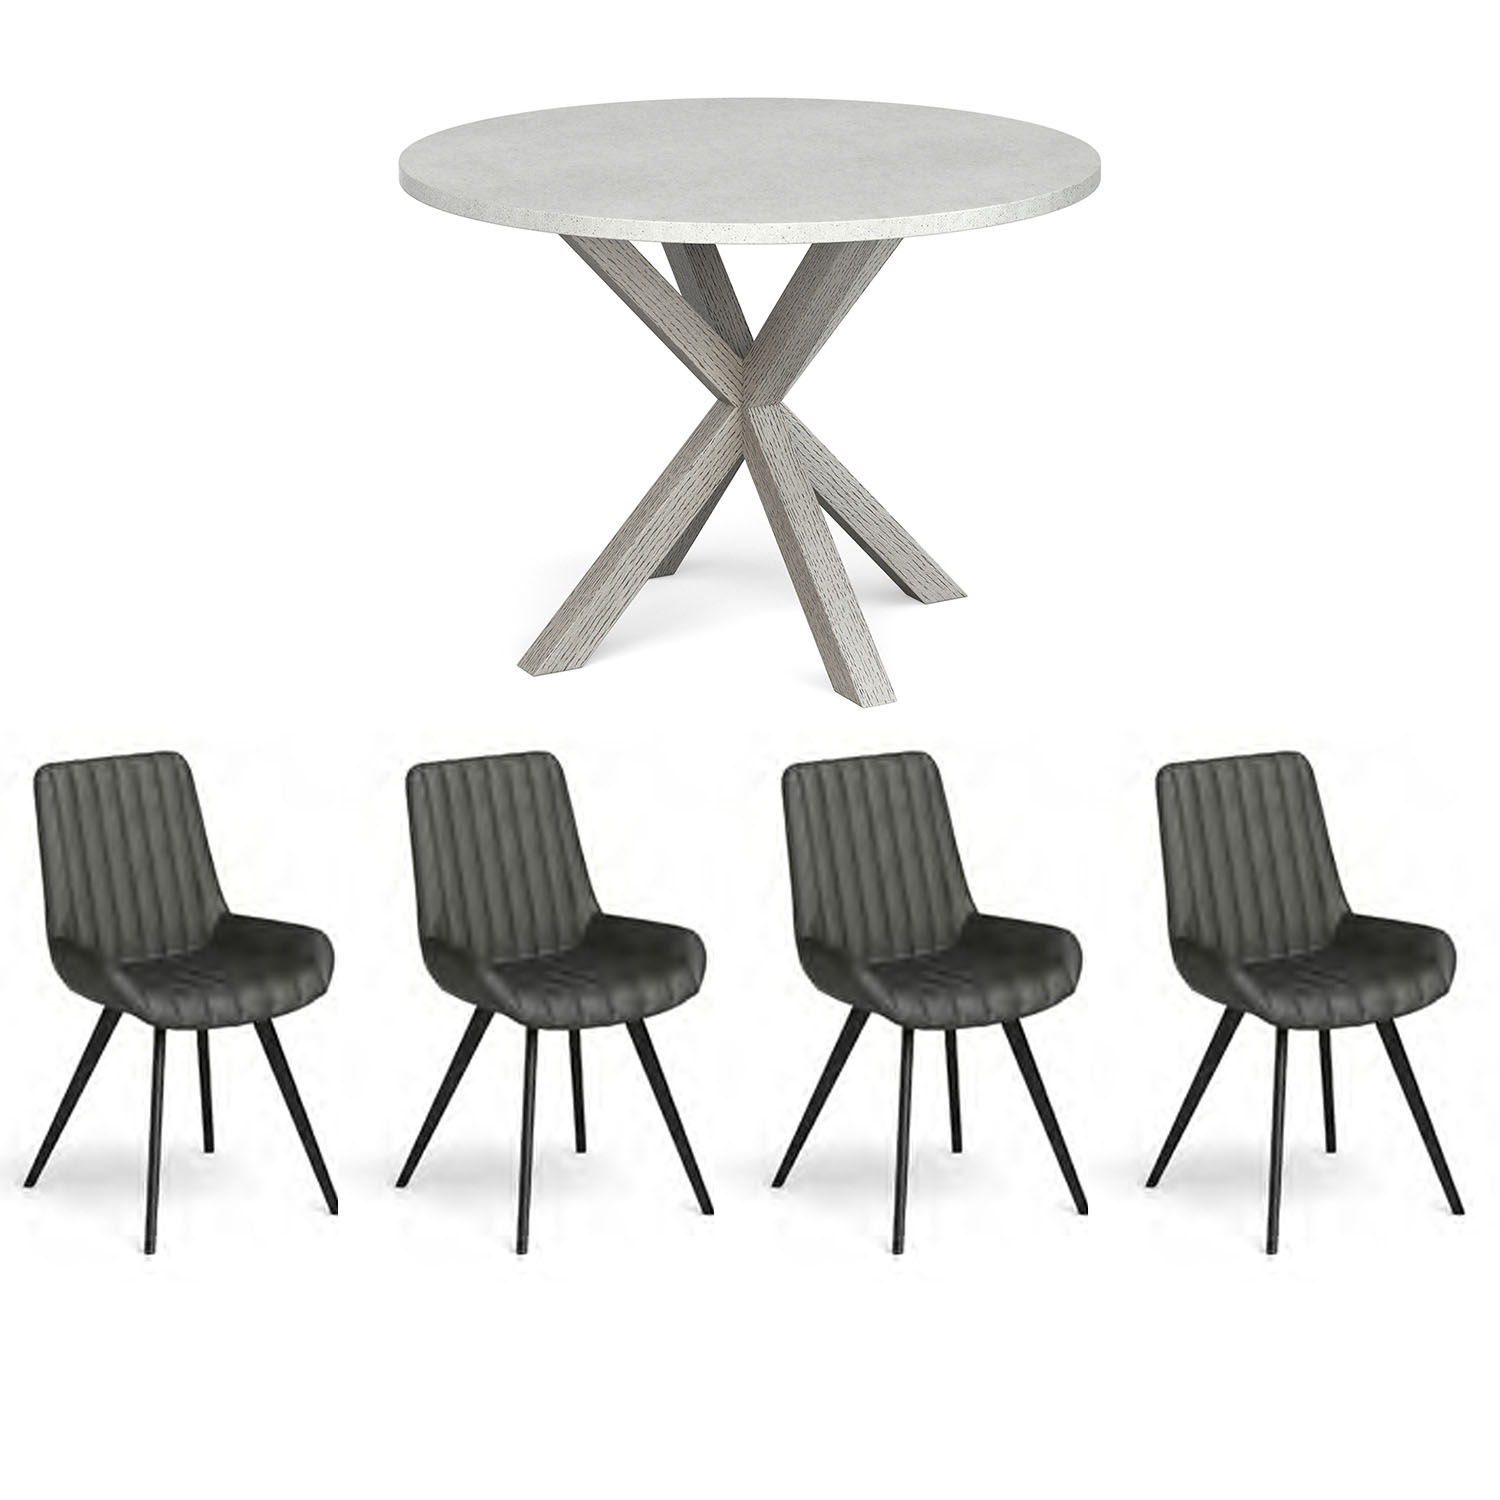 Harbour Round Dining Table + x4 Dining Chair Set